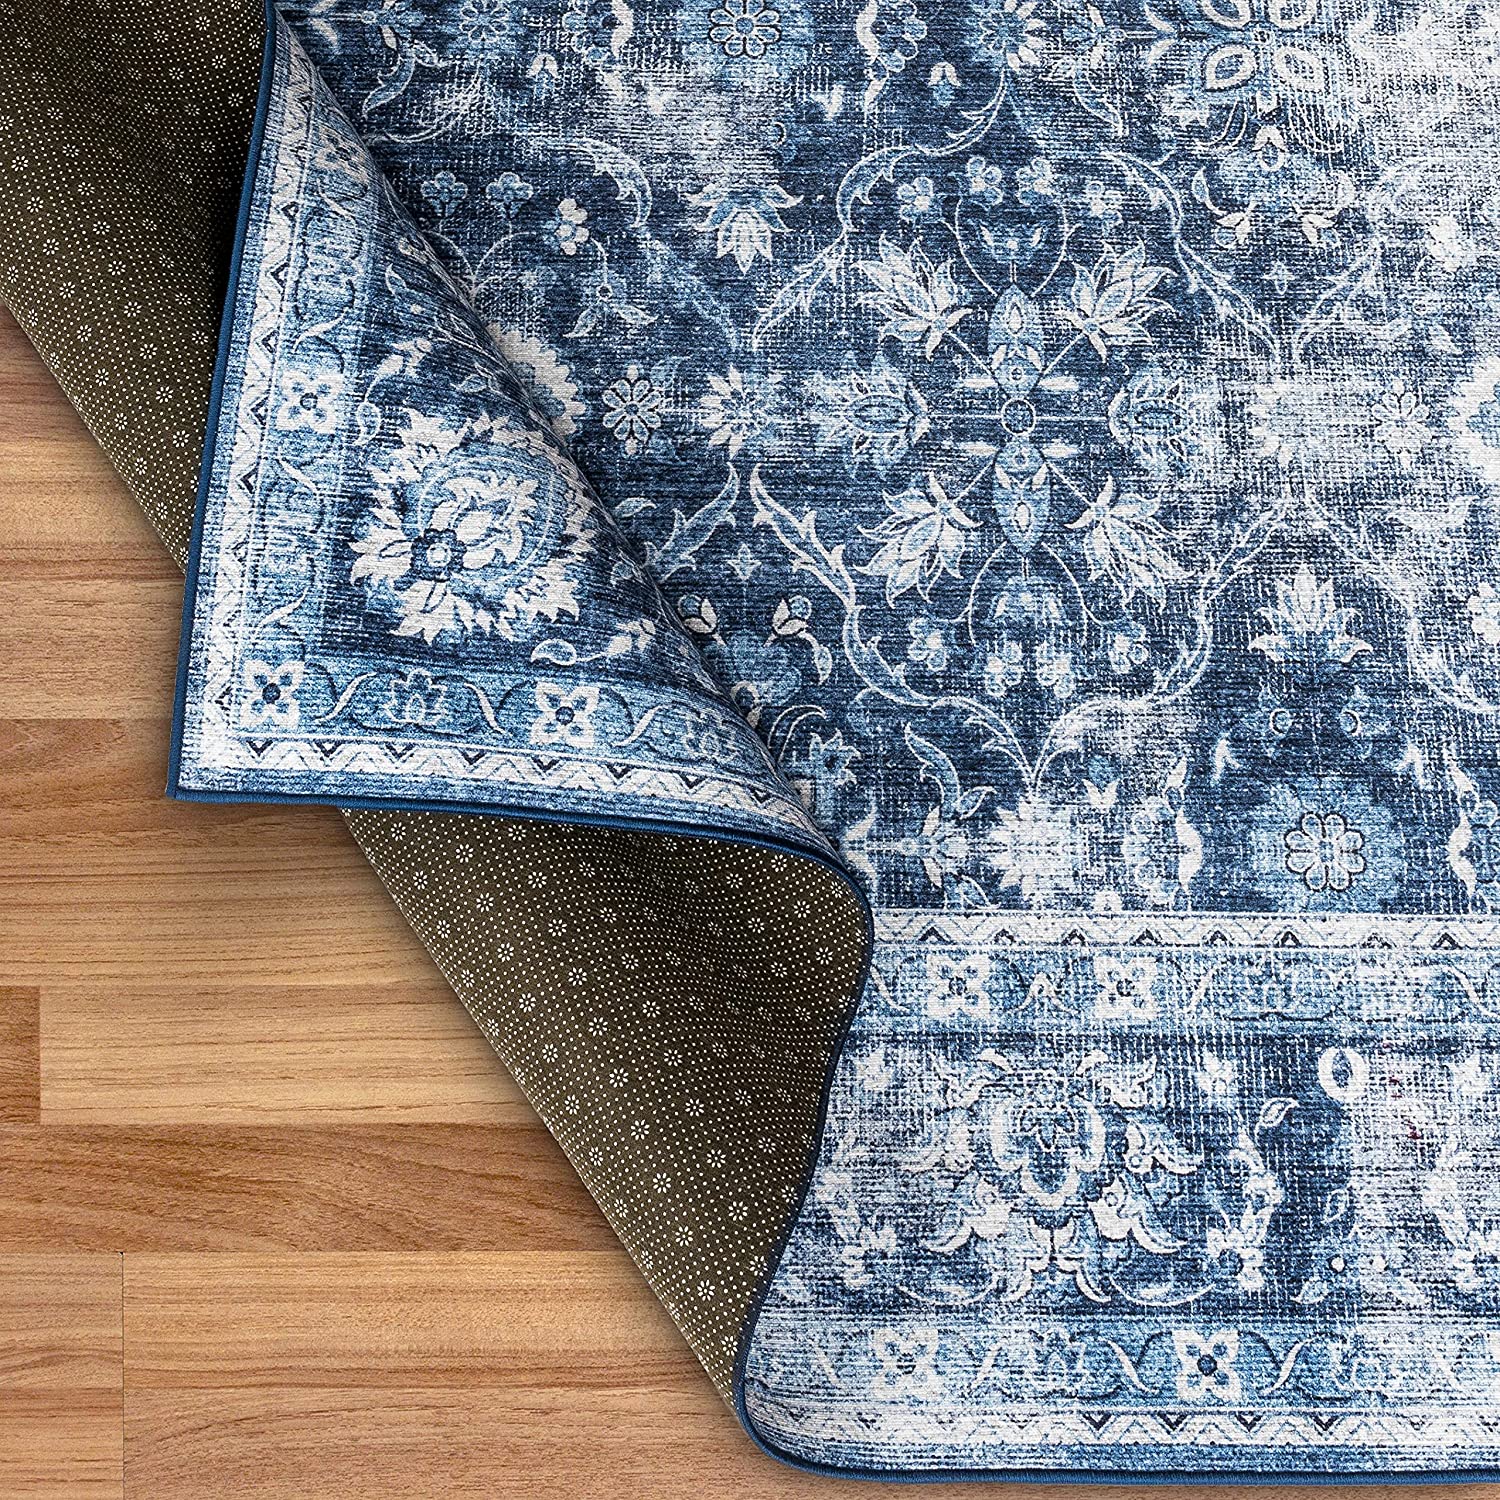 ReaLife Machine Washable Rug Stain Resistant, Non-Shed Eco-Friendly, Non -Slip, Family  Pet Friendly Made from Premium Recycled Fibers Vintage  Distressed Trellis Blue 4' x 6'